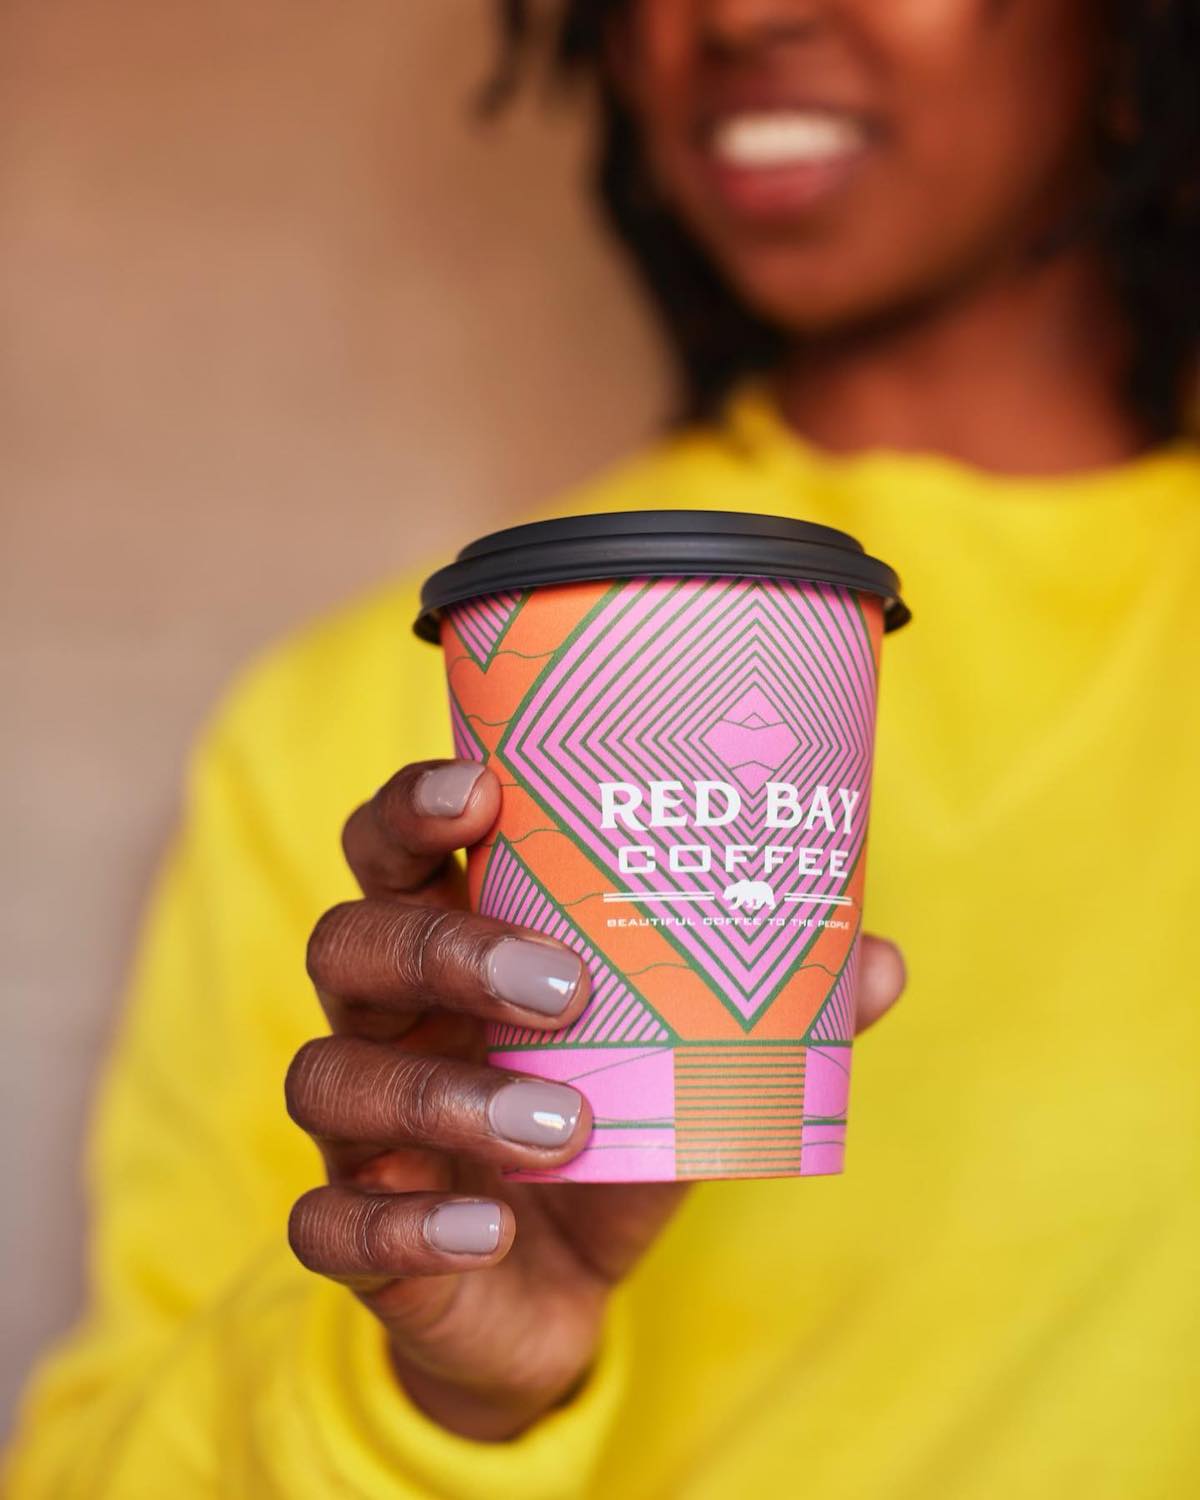 Oakland's Black-Owned Coffee Roaster Red Bay Announces New